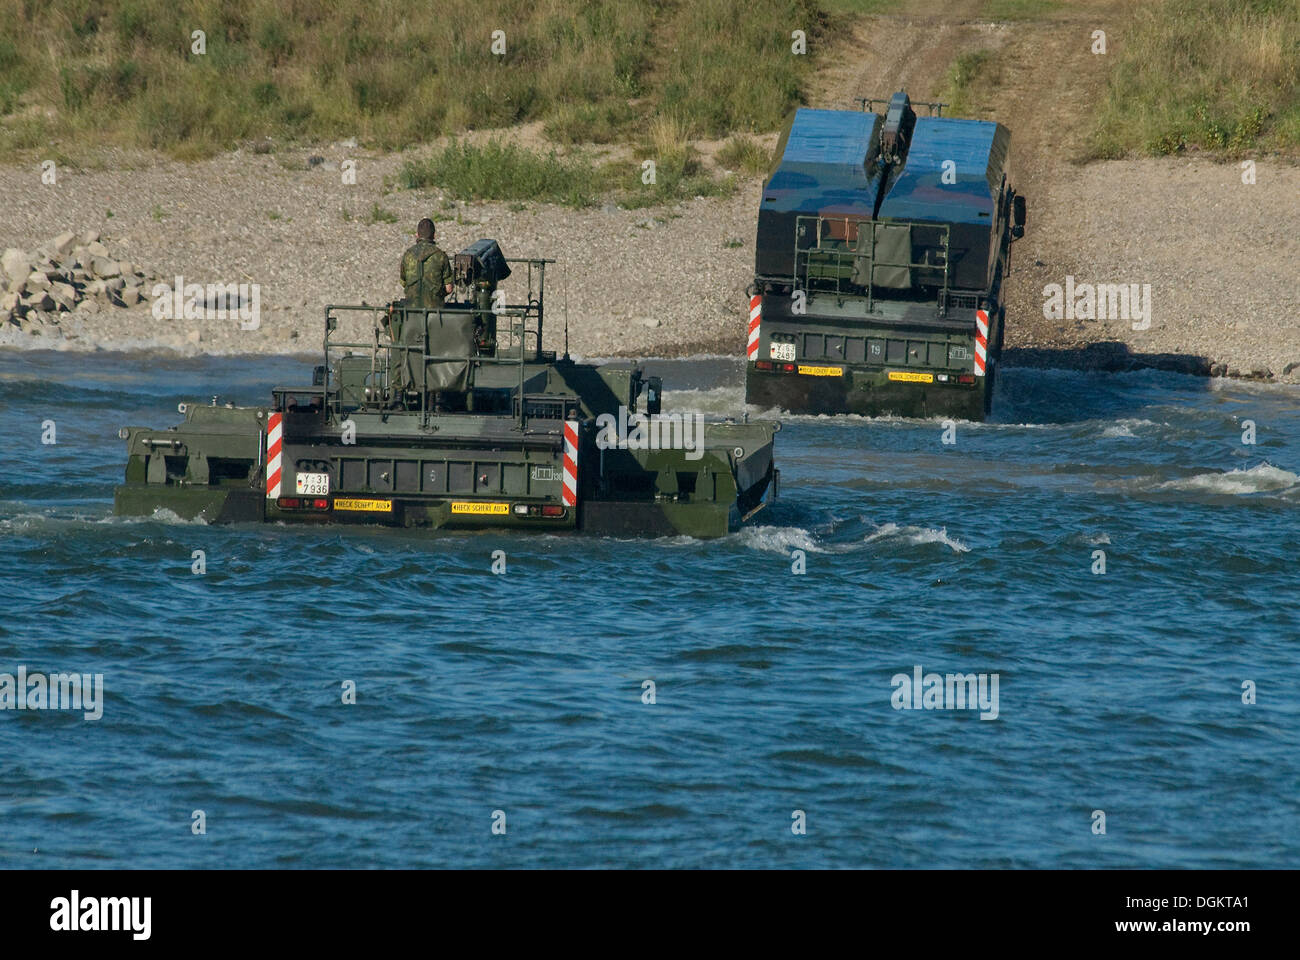 Two M3 amphibious vehicles of the Bundeswehr, federal army, emerging from the Rhine, one with folded wings Stock Photo